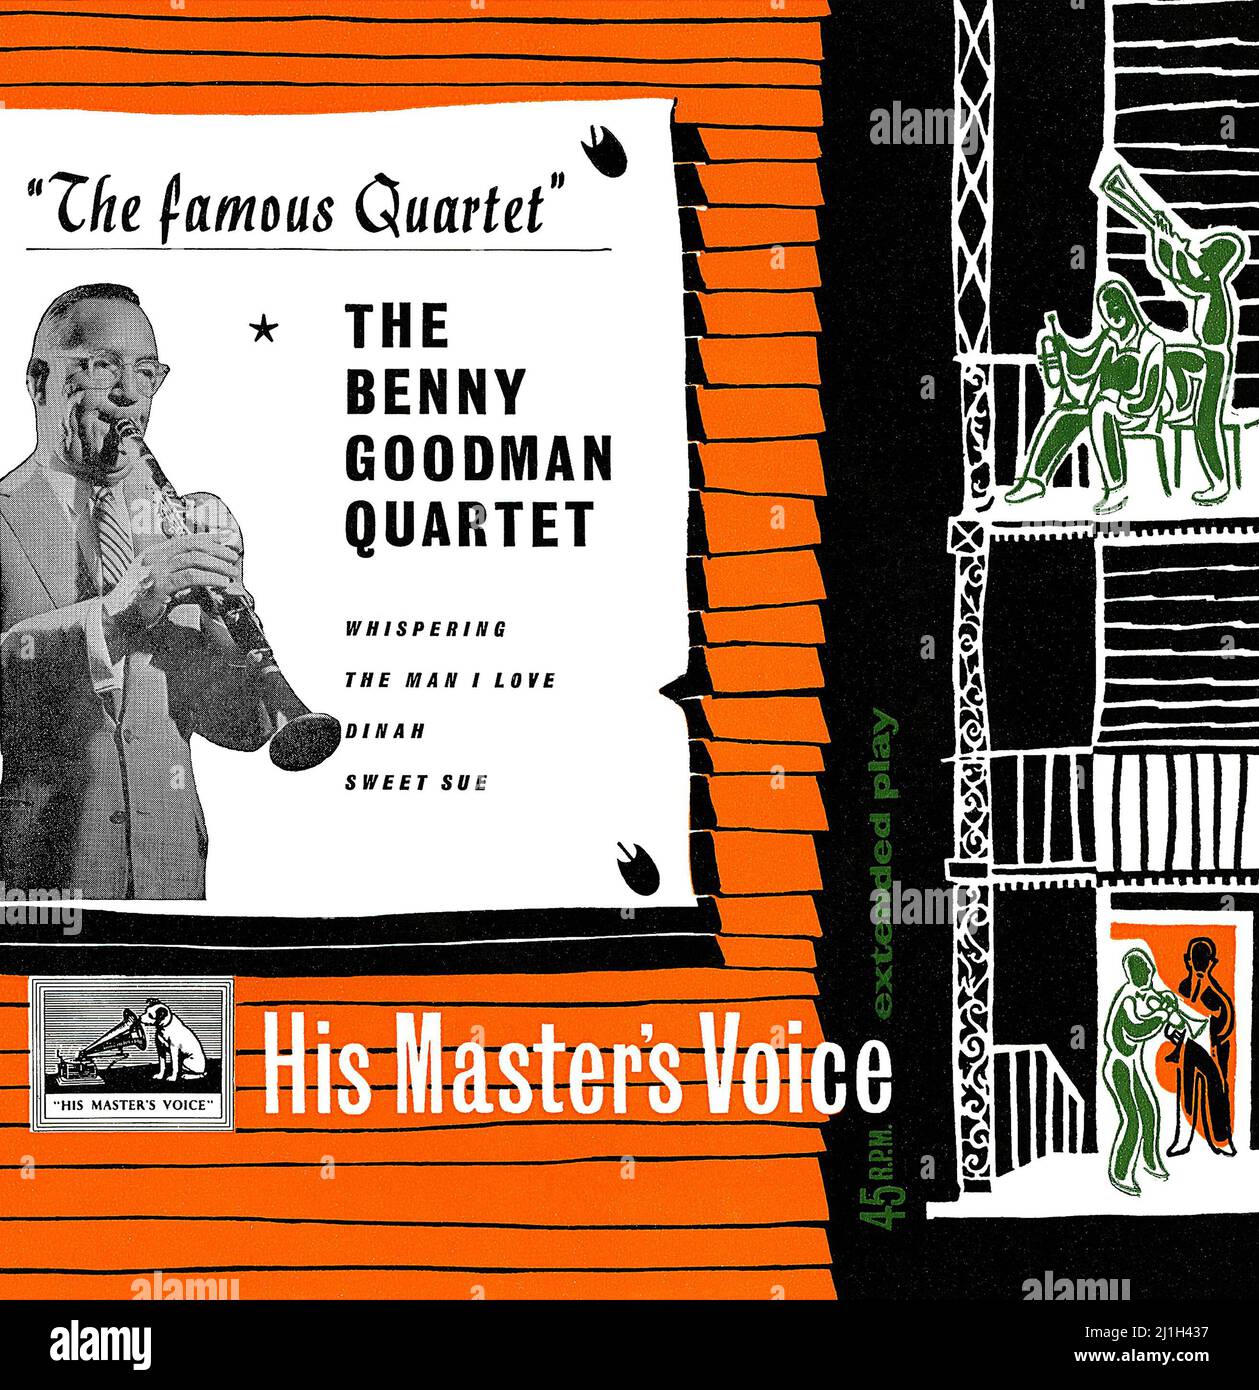 Front cover of a British vinyl 7' E.P. by the Benny Goodman Quartet titled The Famous Quartet. Issued in 1956 on the His Master's Voice label. The recordings are from the 1930's. Stock Photo